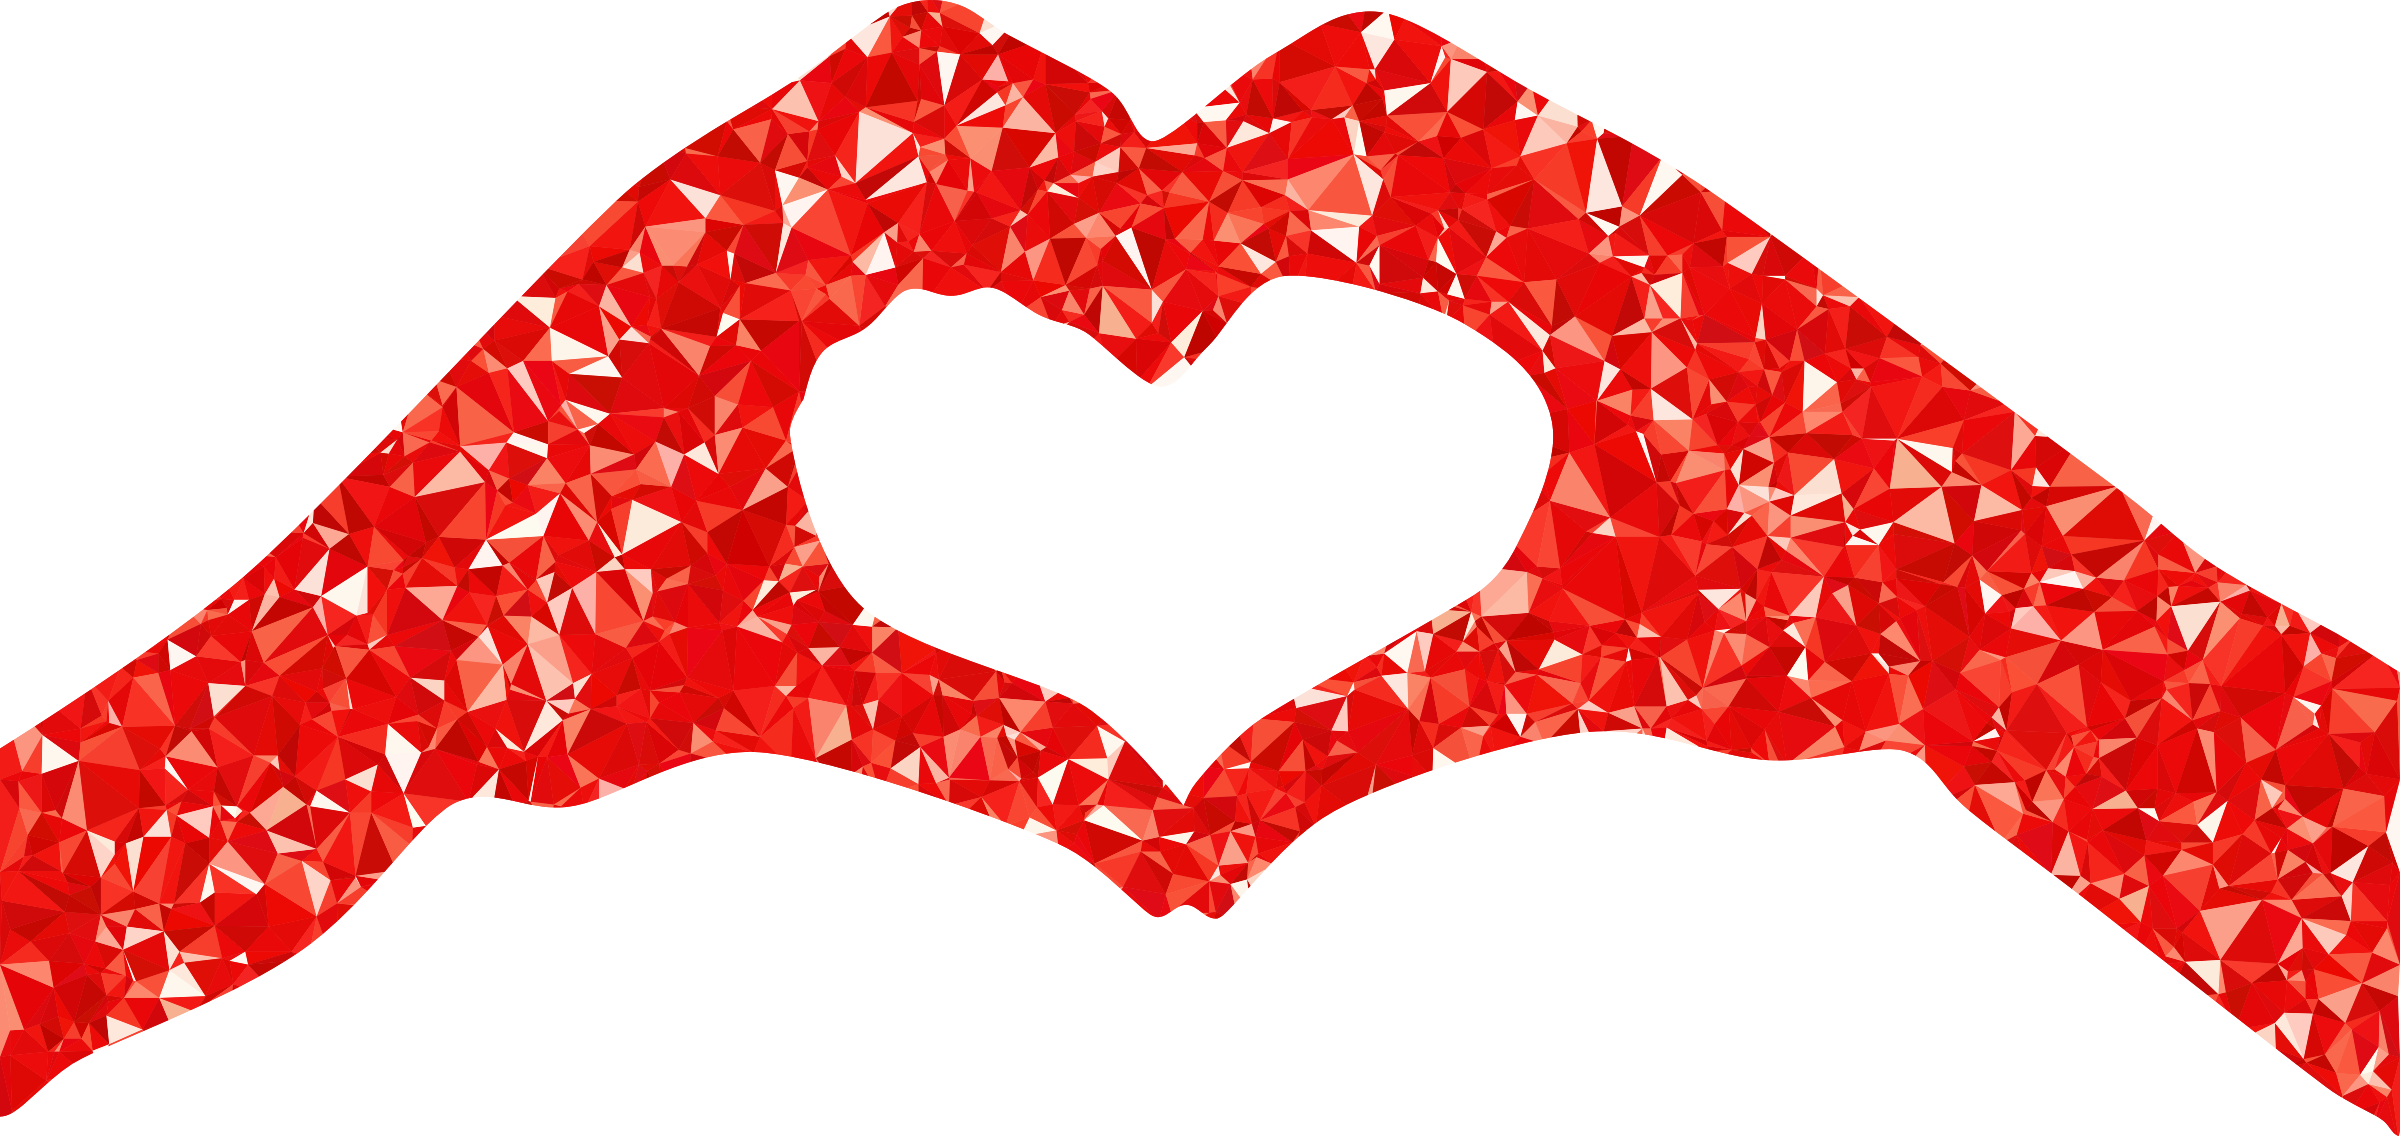 Heart PNG Picture